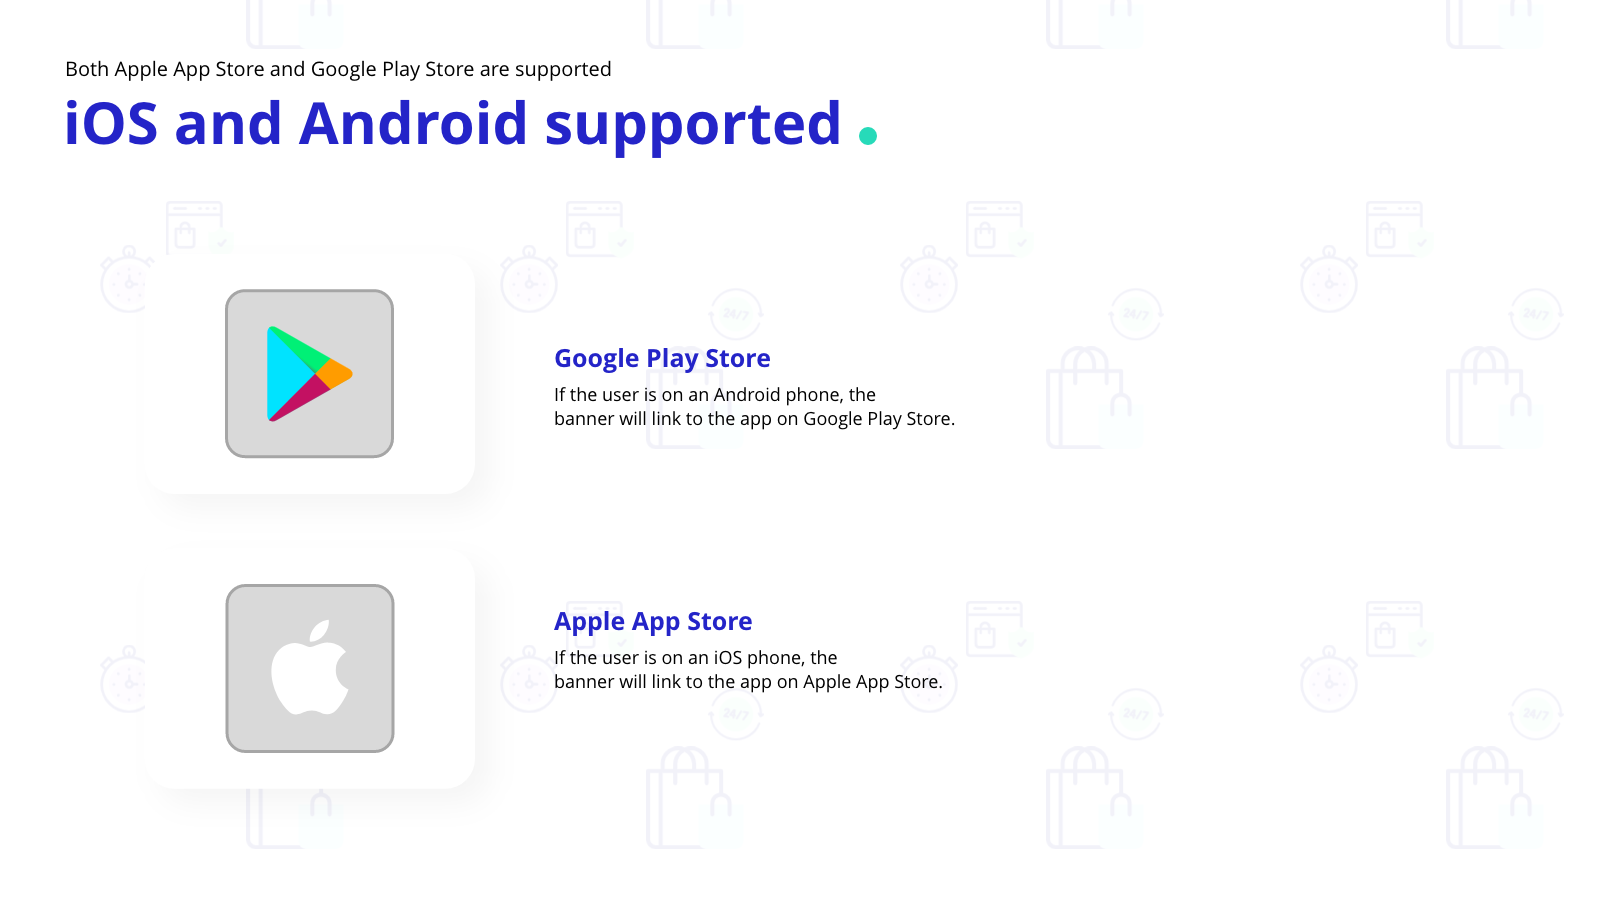 iOS and Android supported